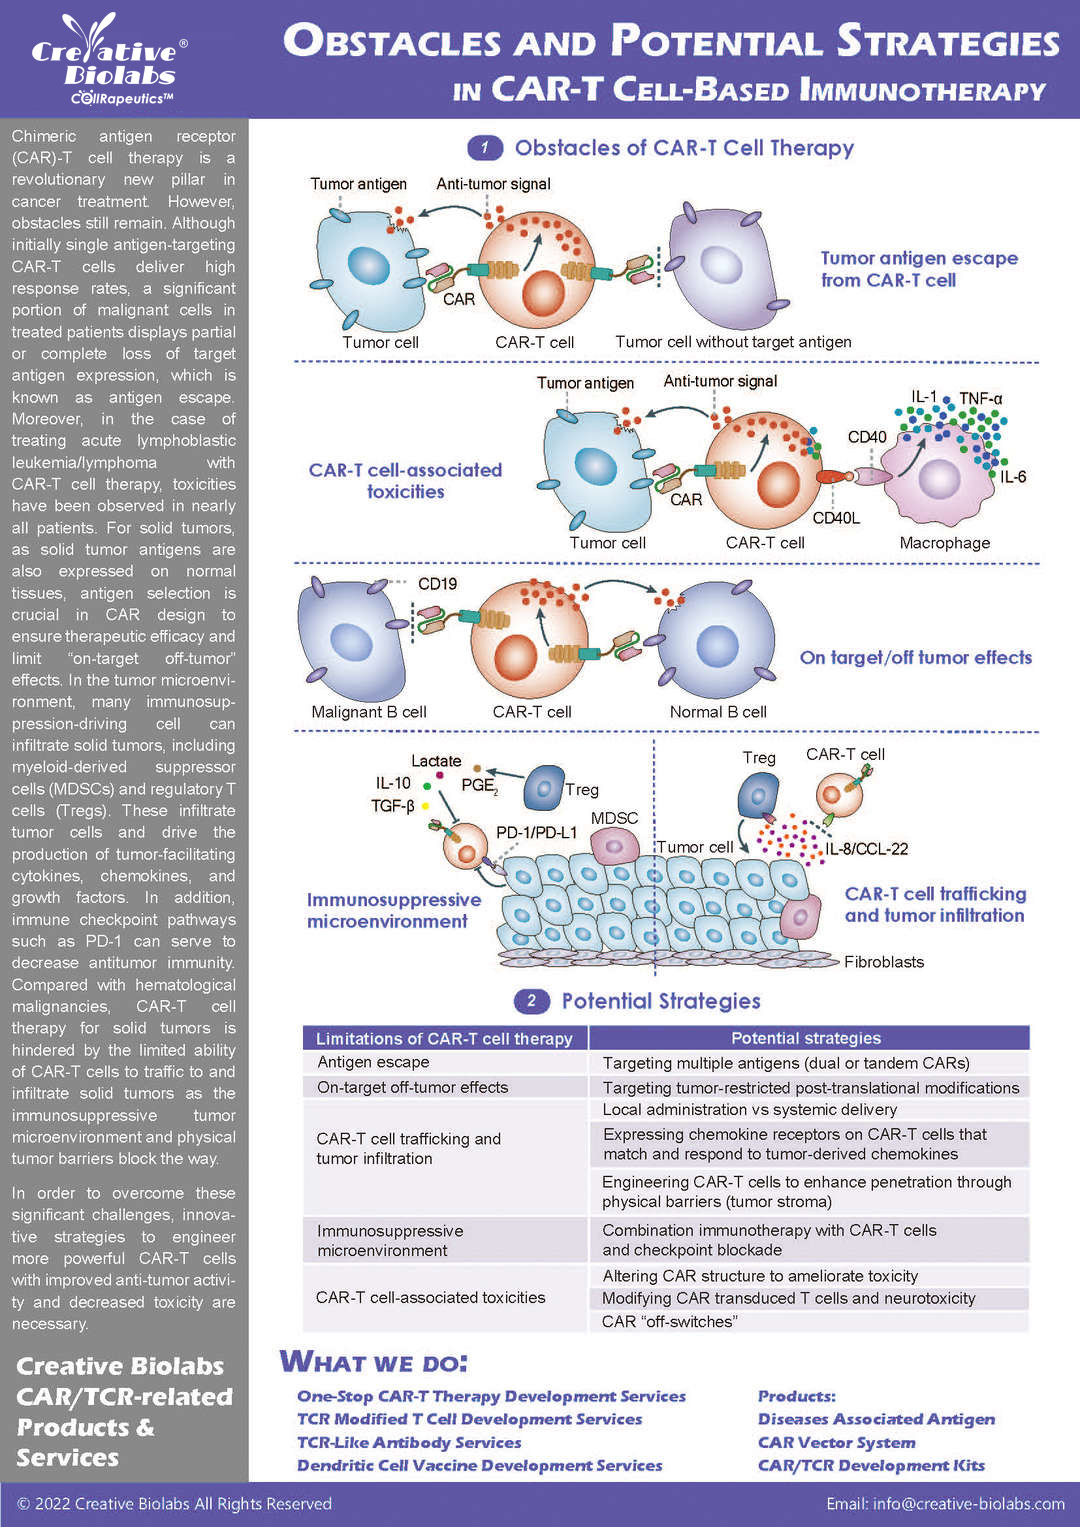 CAR-T Cell Immunotherapy: Clinical Applications and Challenges